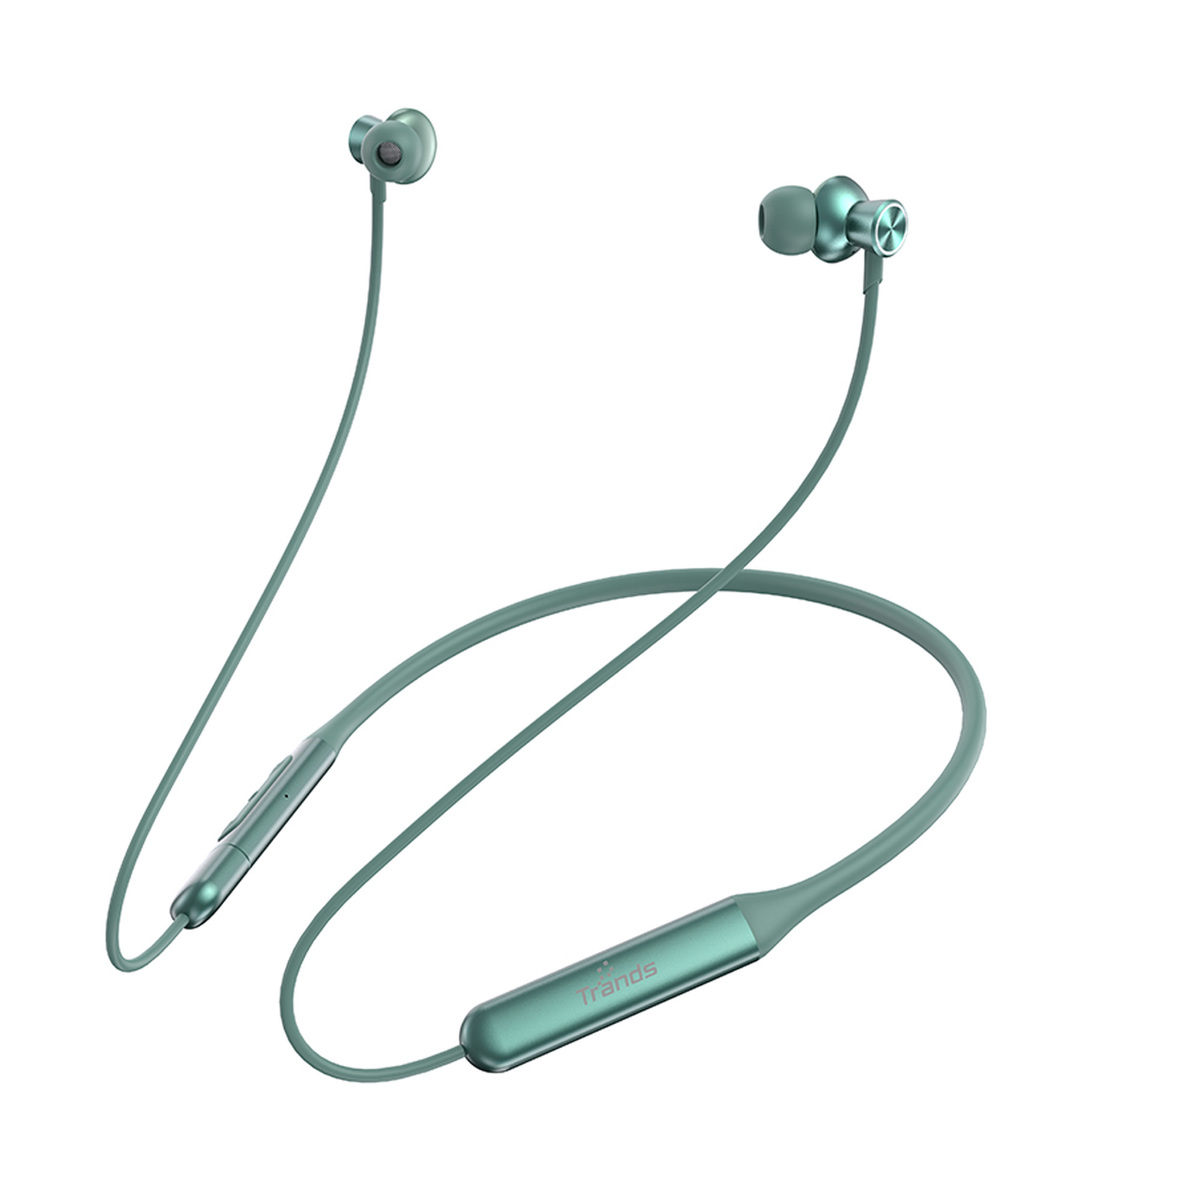 Trands Neckband Wireless Earphone with Magnetic Earbuds, BT364